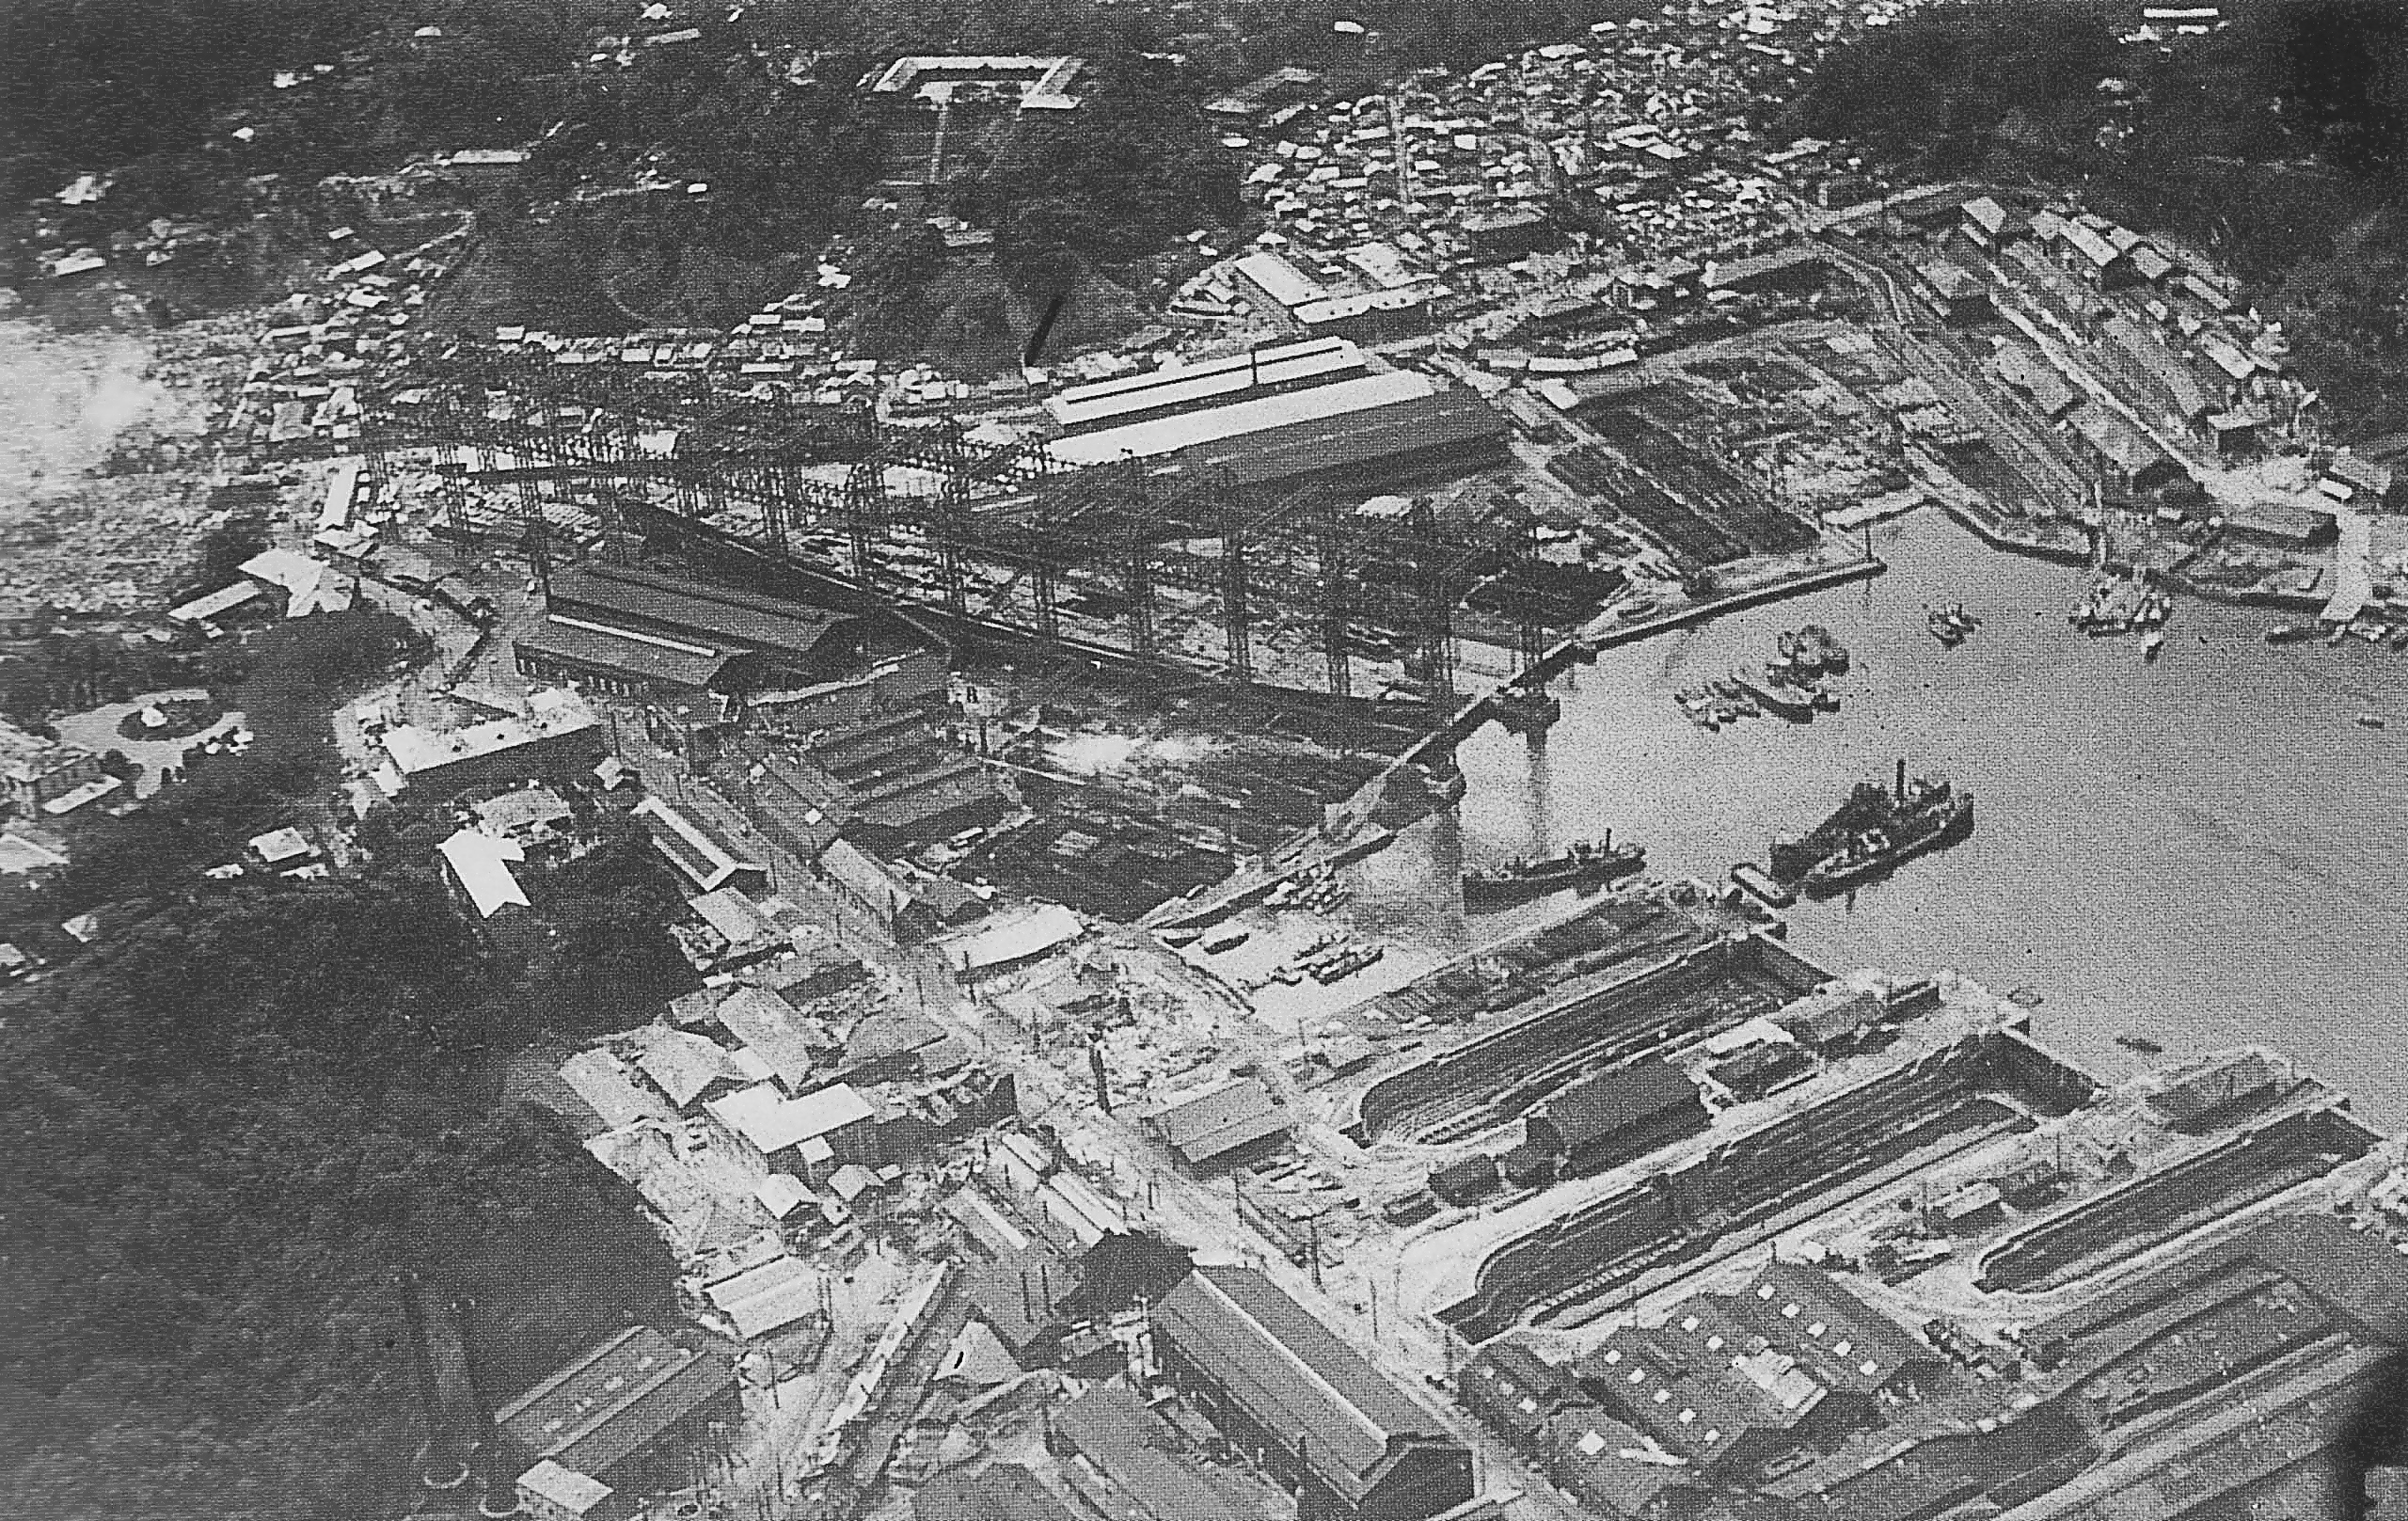 Aerial view of Yokosuka Naval Arsenal days after the Great Kanto Earthquake, 3 or 4 Sep 1923